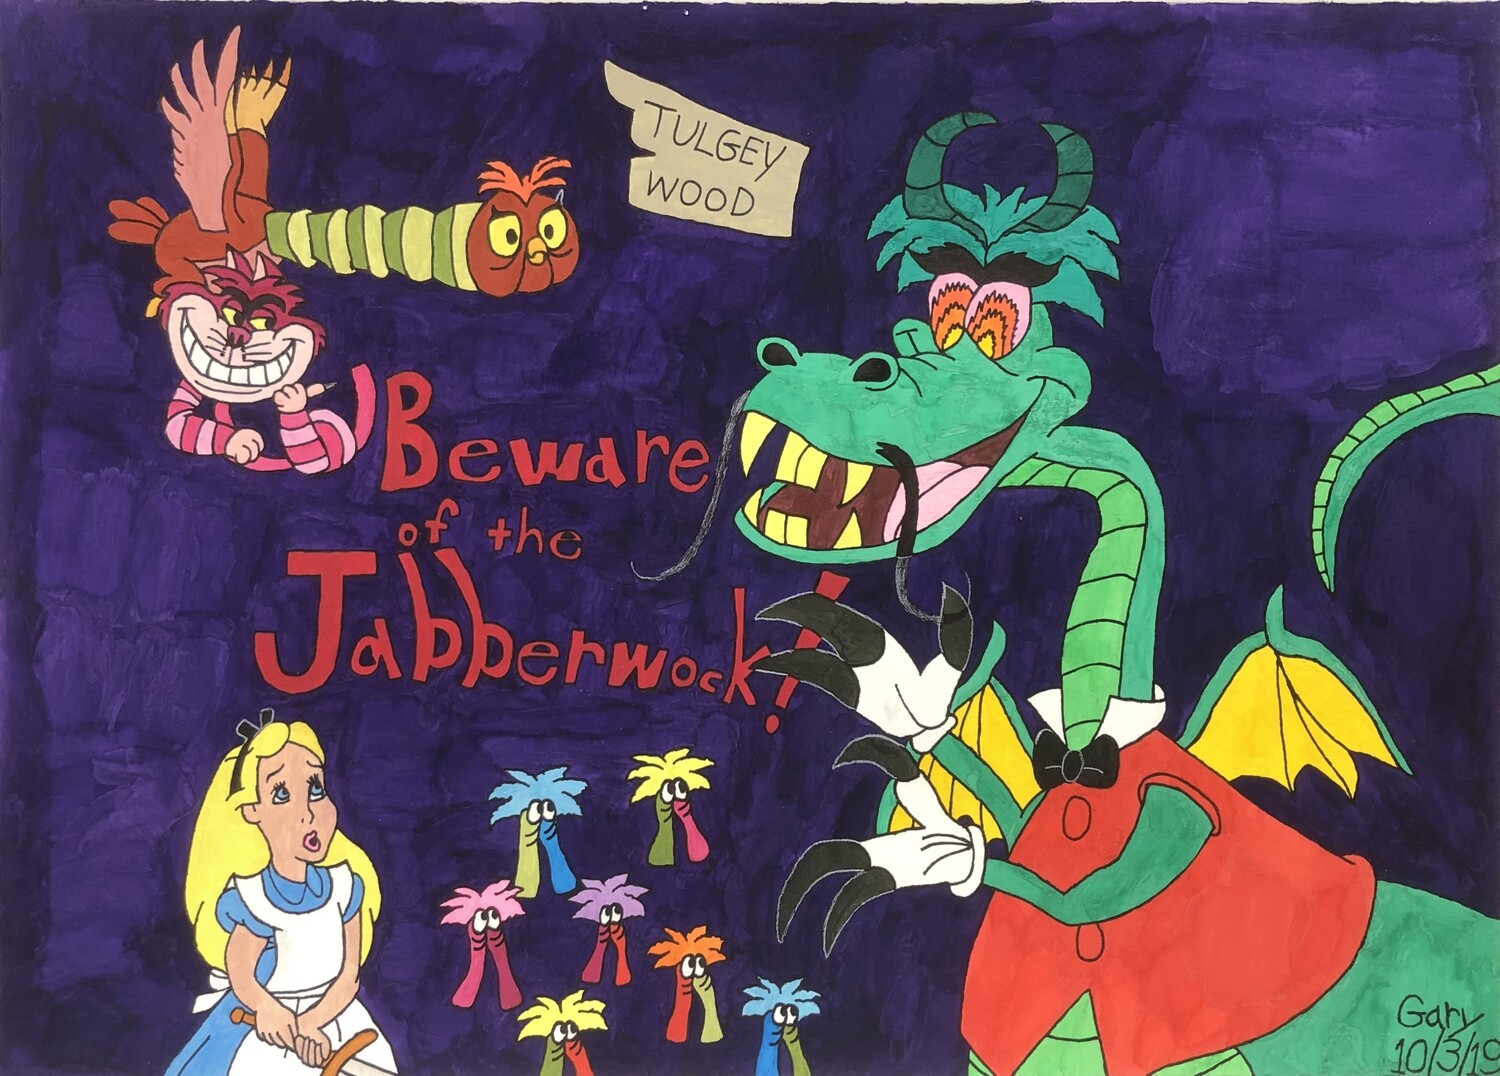 Alice and the Jabberwocky